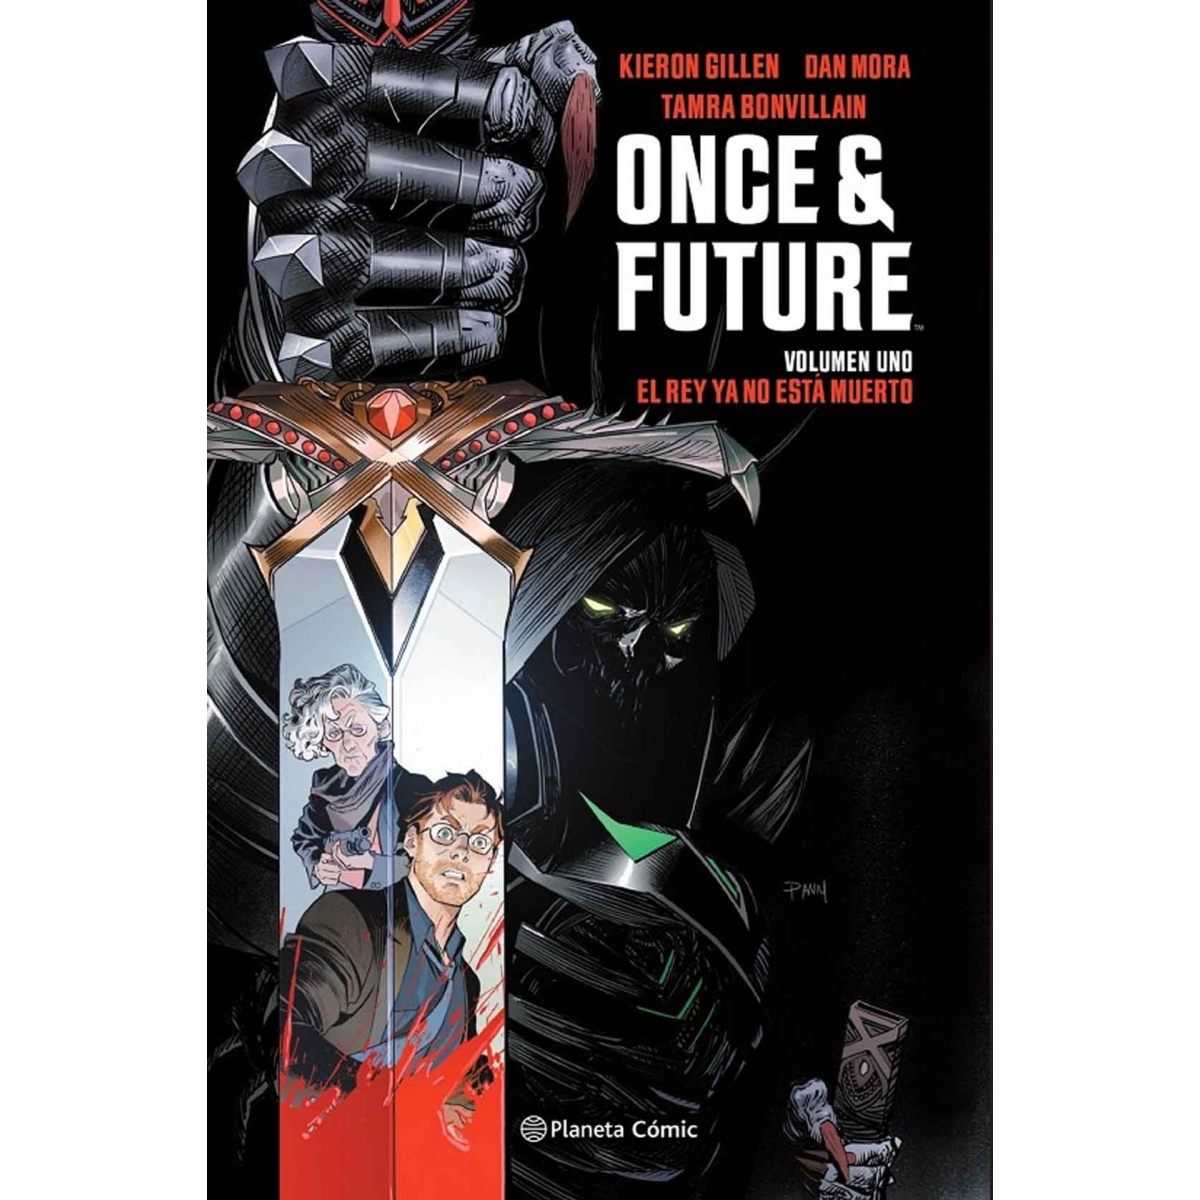 Once & Future 01